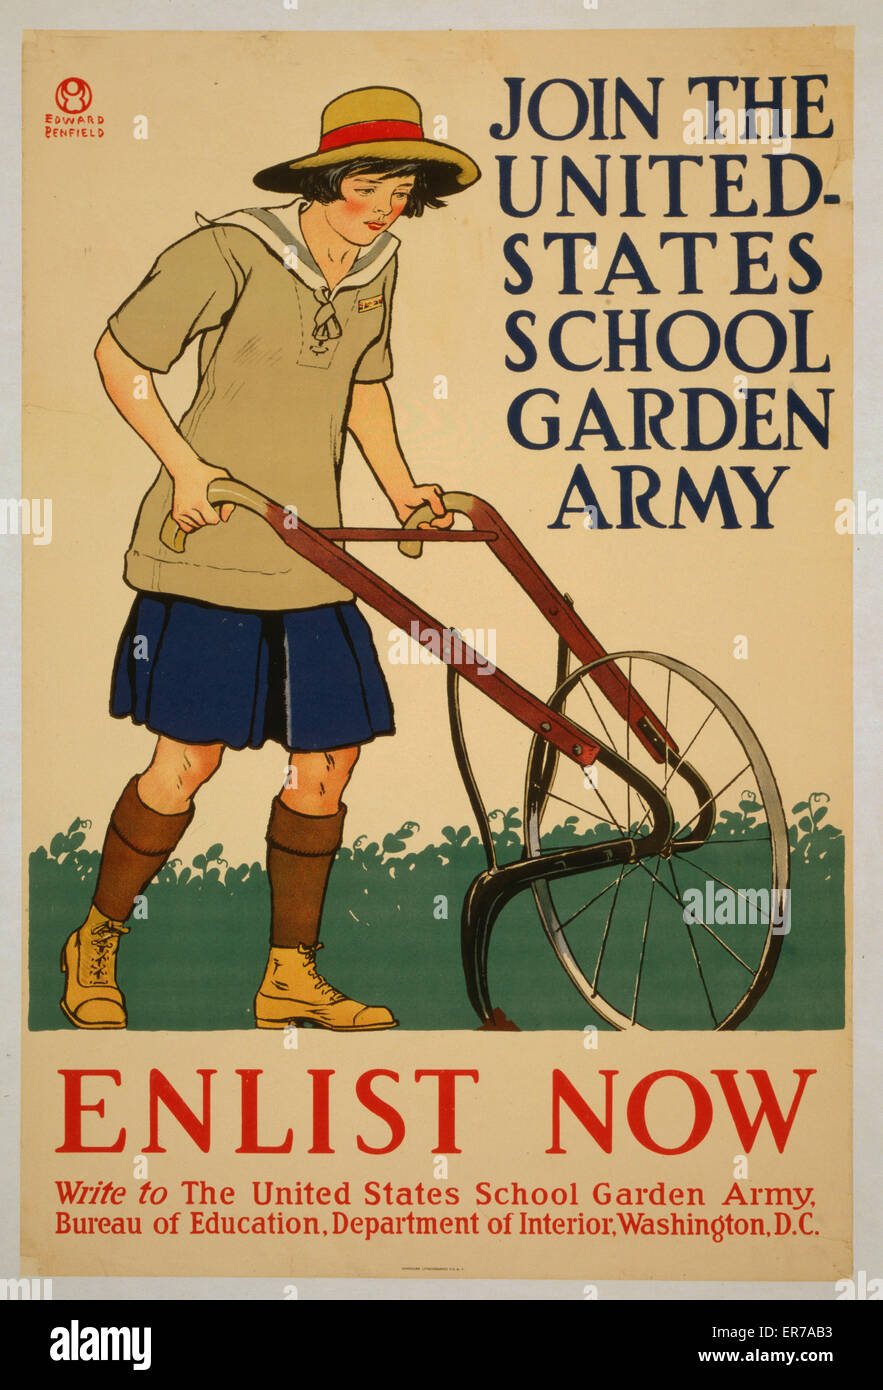 Join the United States school garden army - Enlist now. Poster showing a girl plowing. Date 1918. Stock Photo